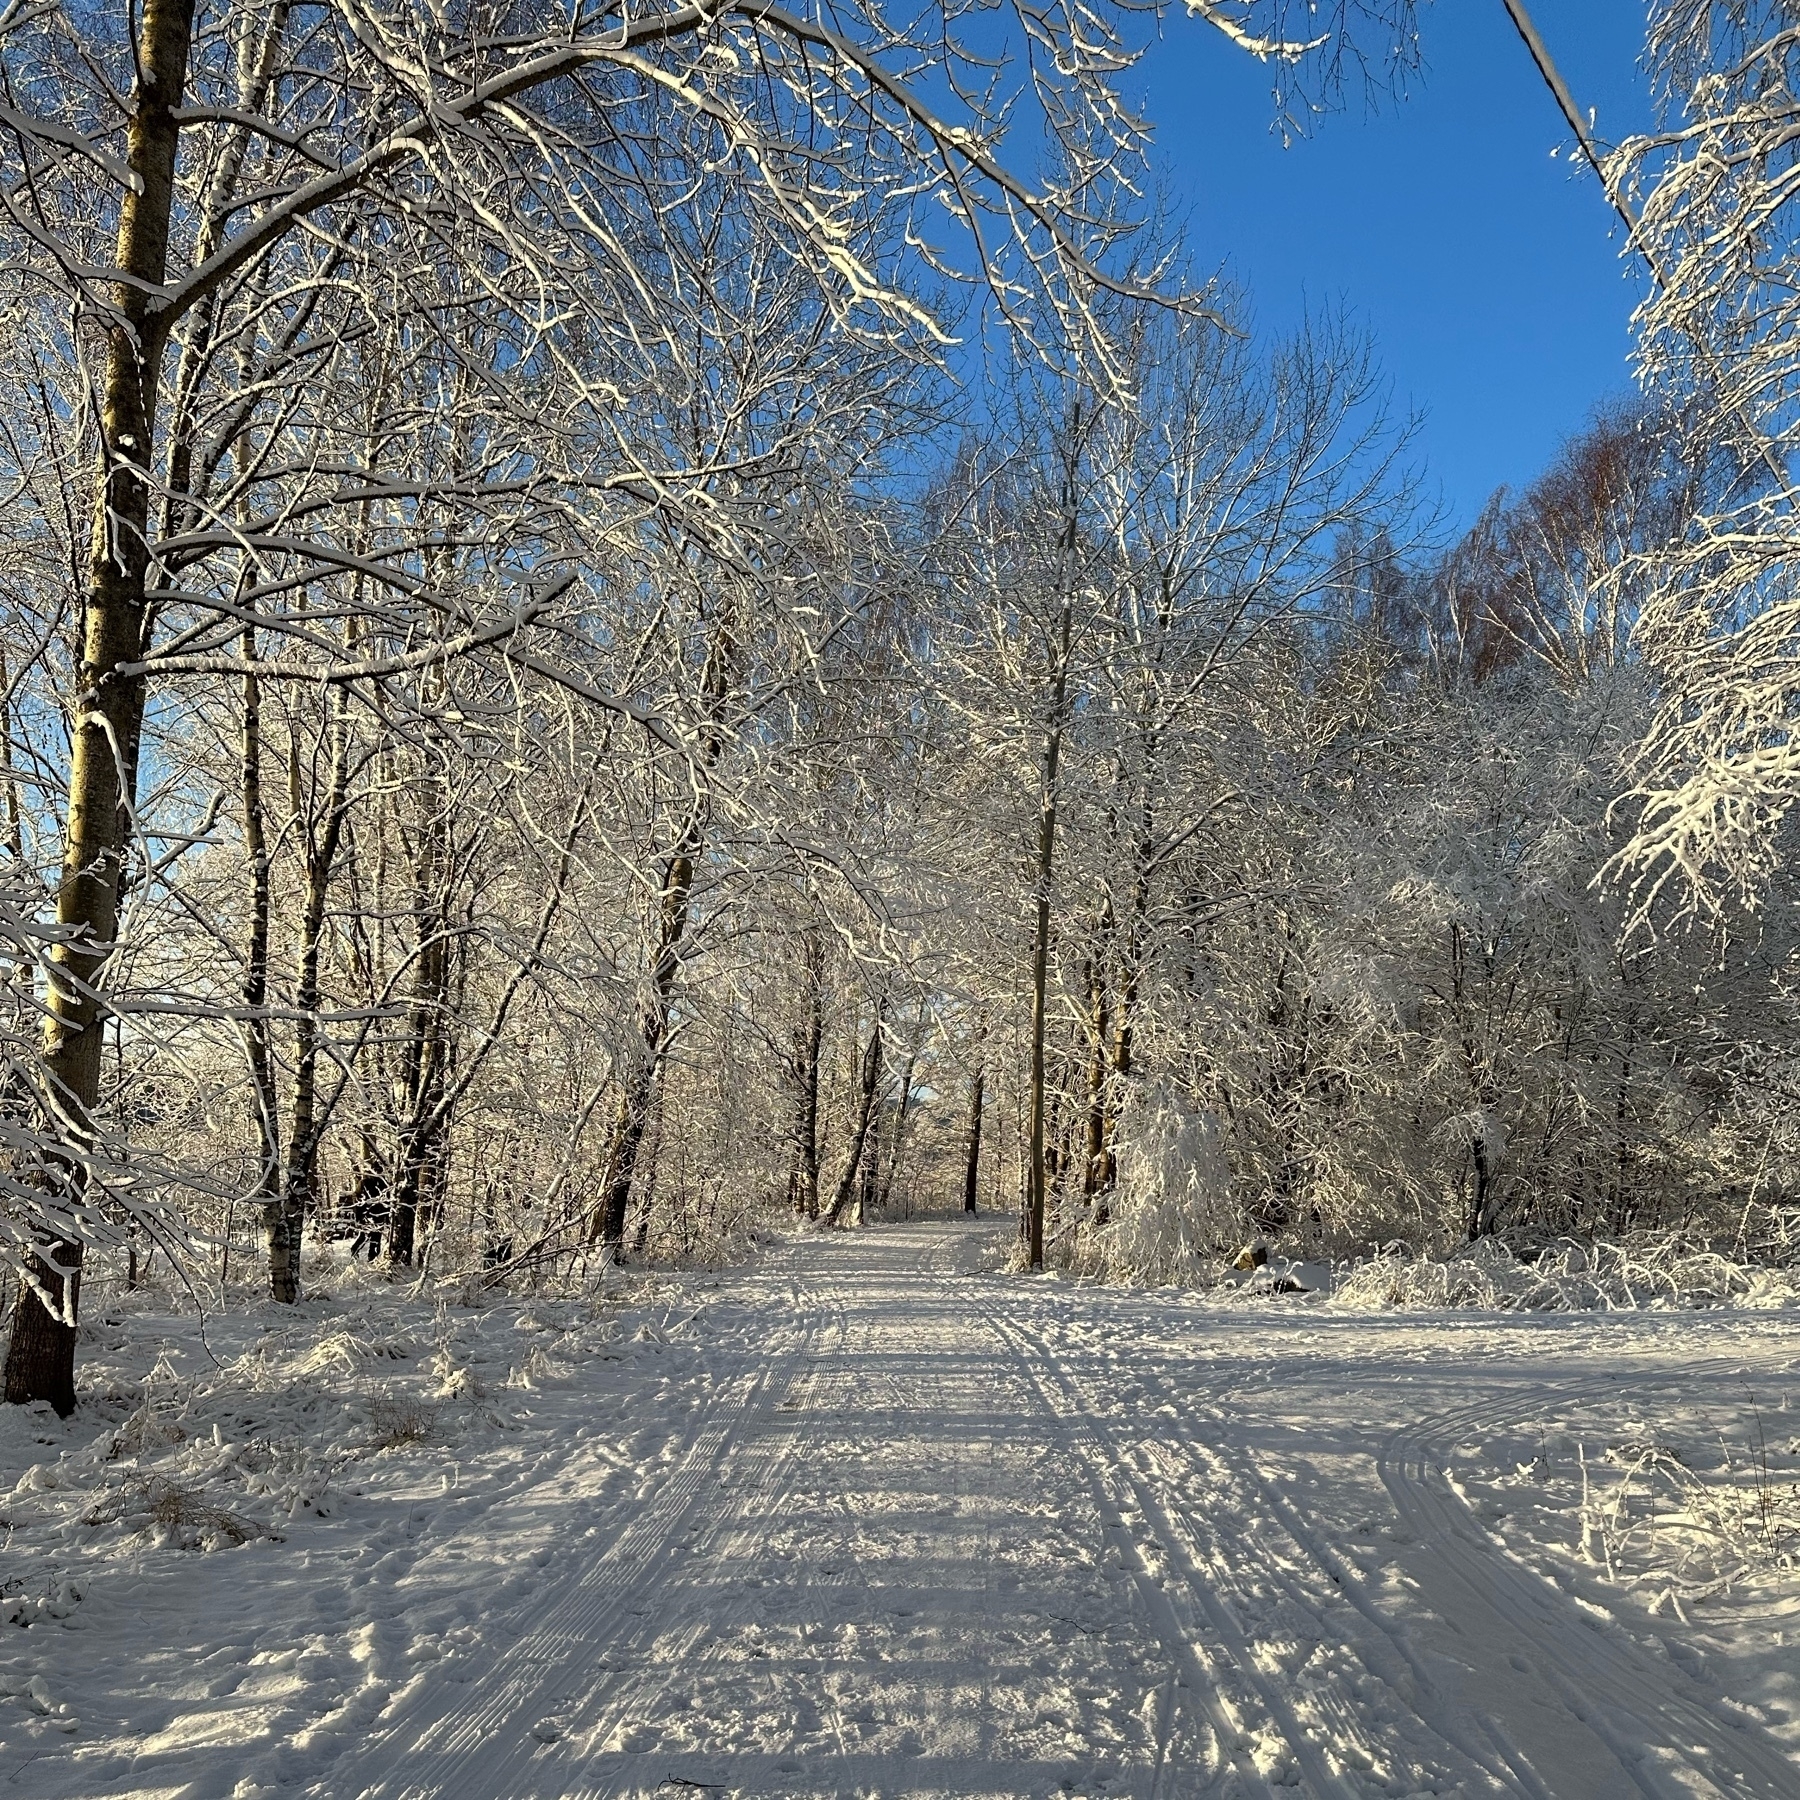 snowy path, ski tracks on the side, snow-clad trees leaning over in a crisp winter weather